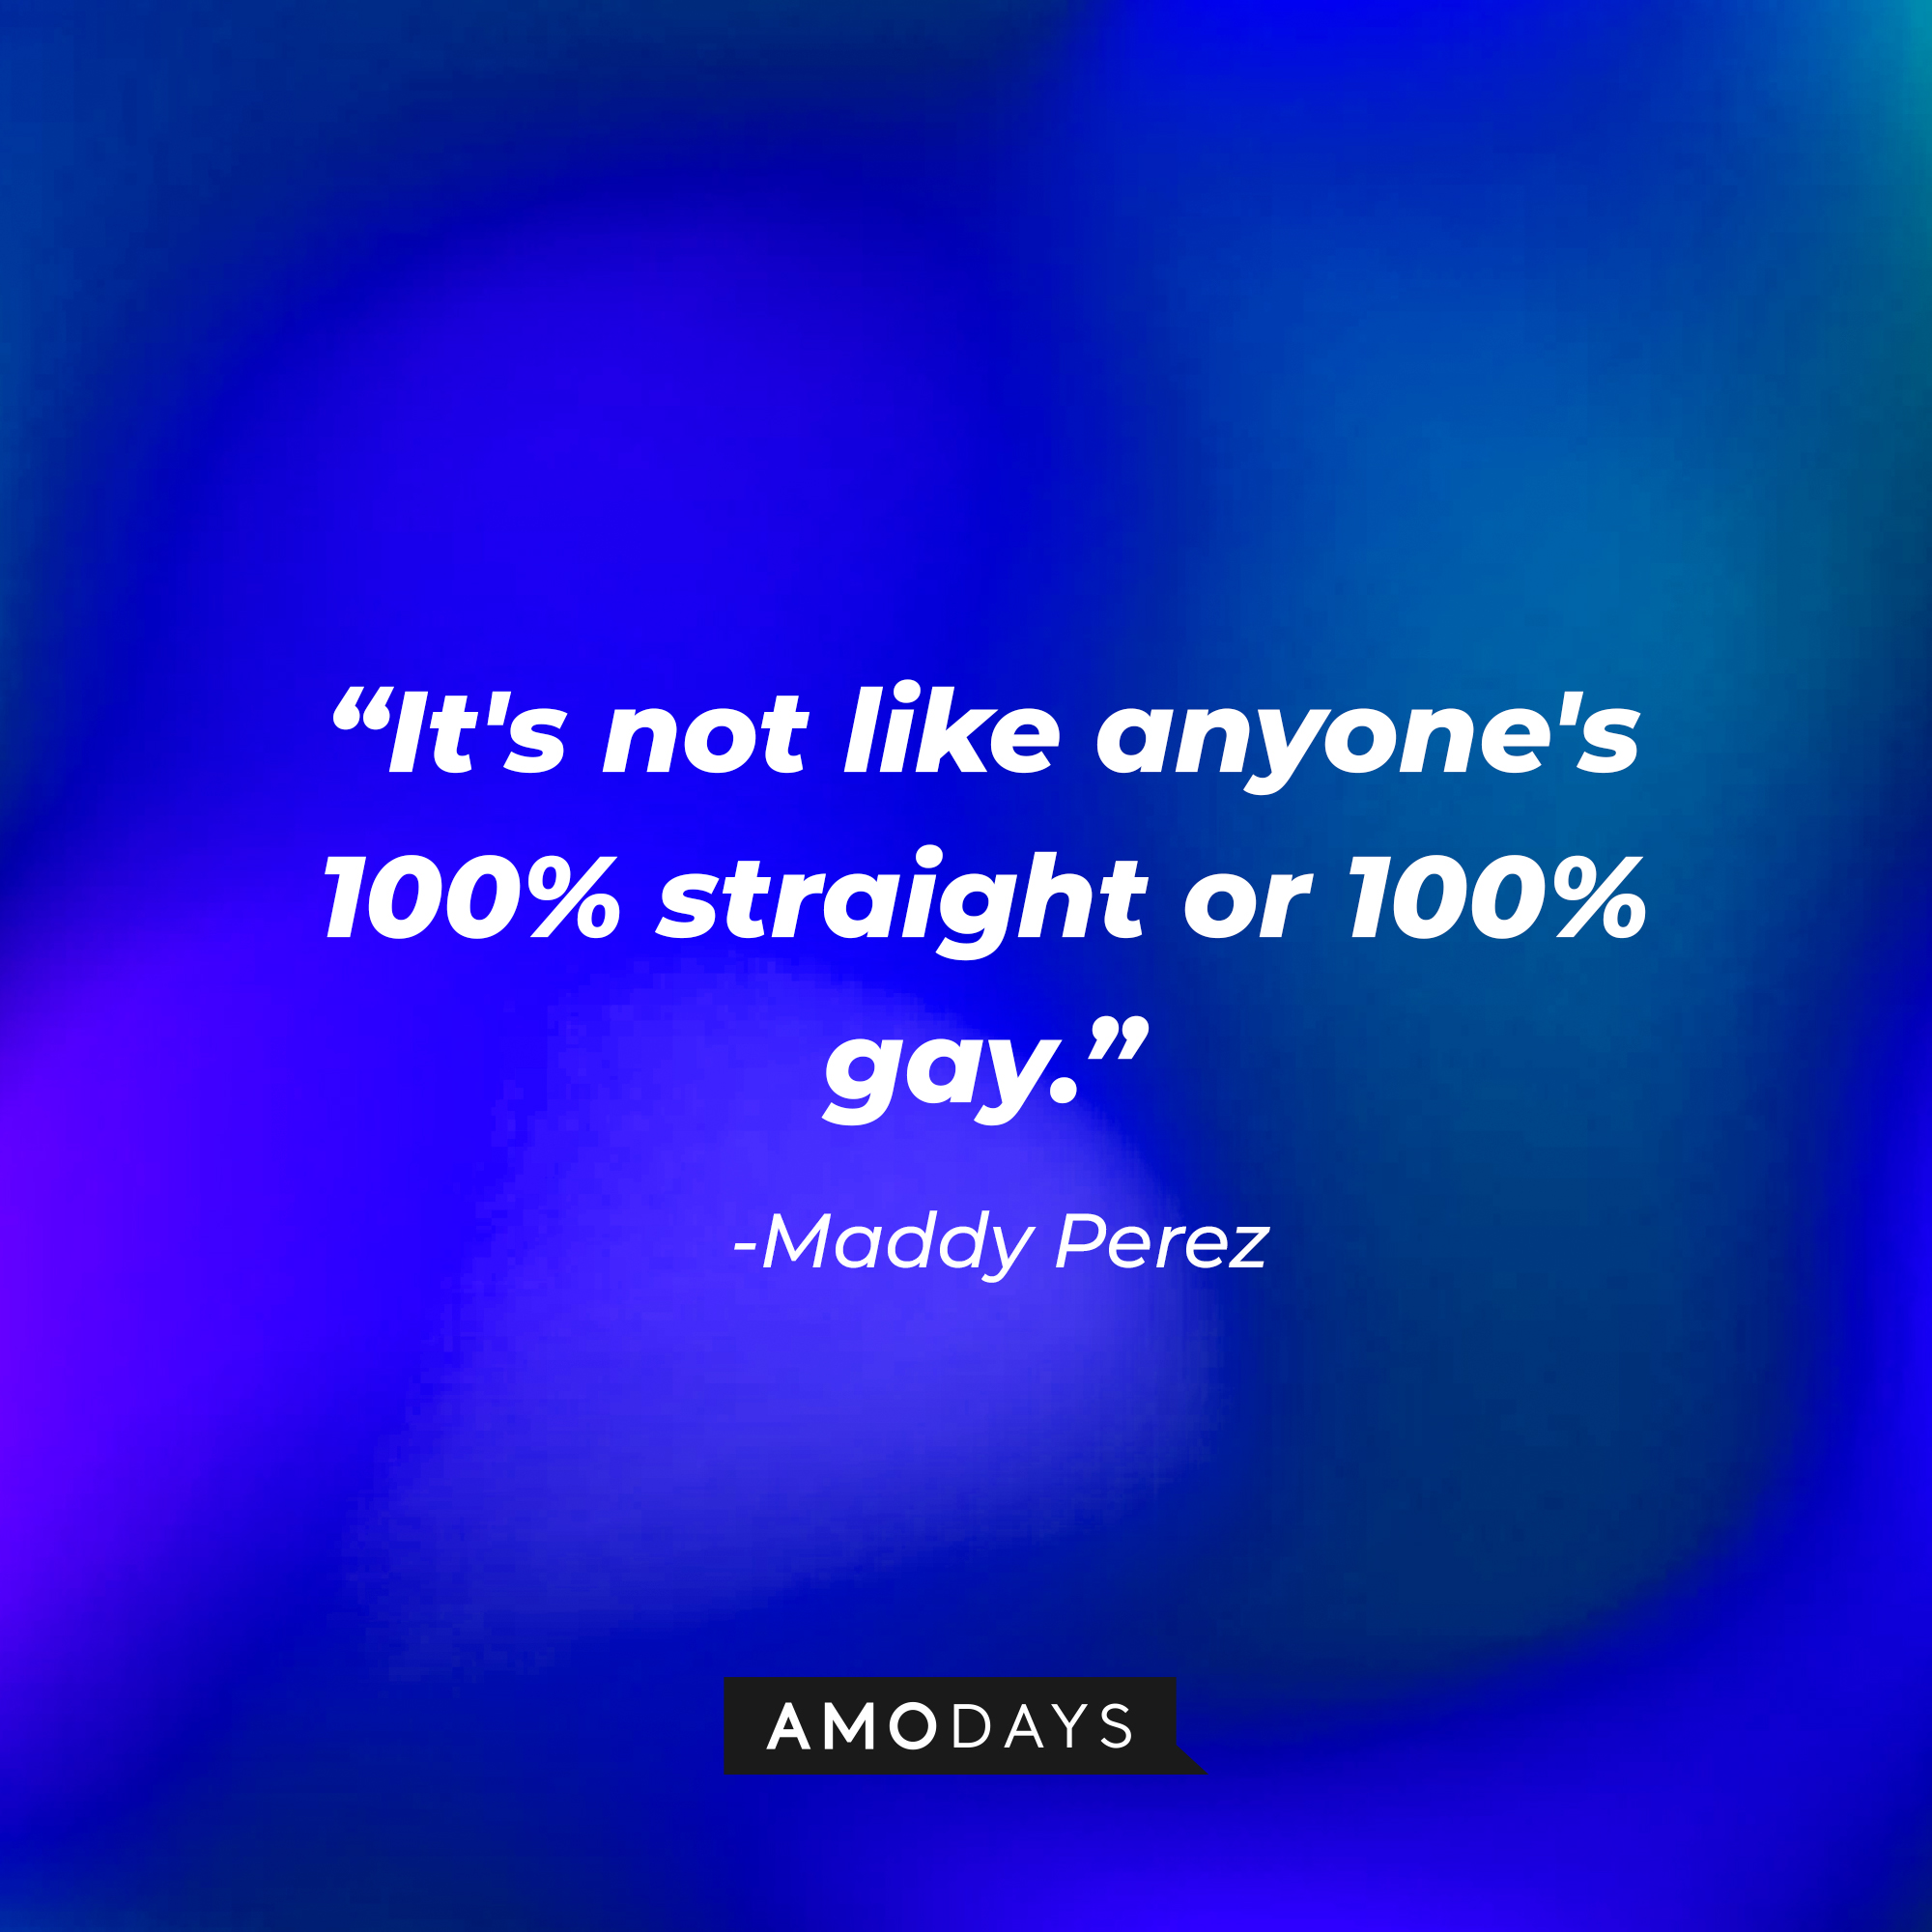 Maddy Perez’ quote: "It's not like anyone's 100% straight or 100% gay." | Source: AmoDays